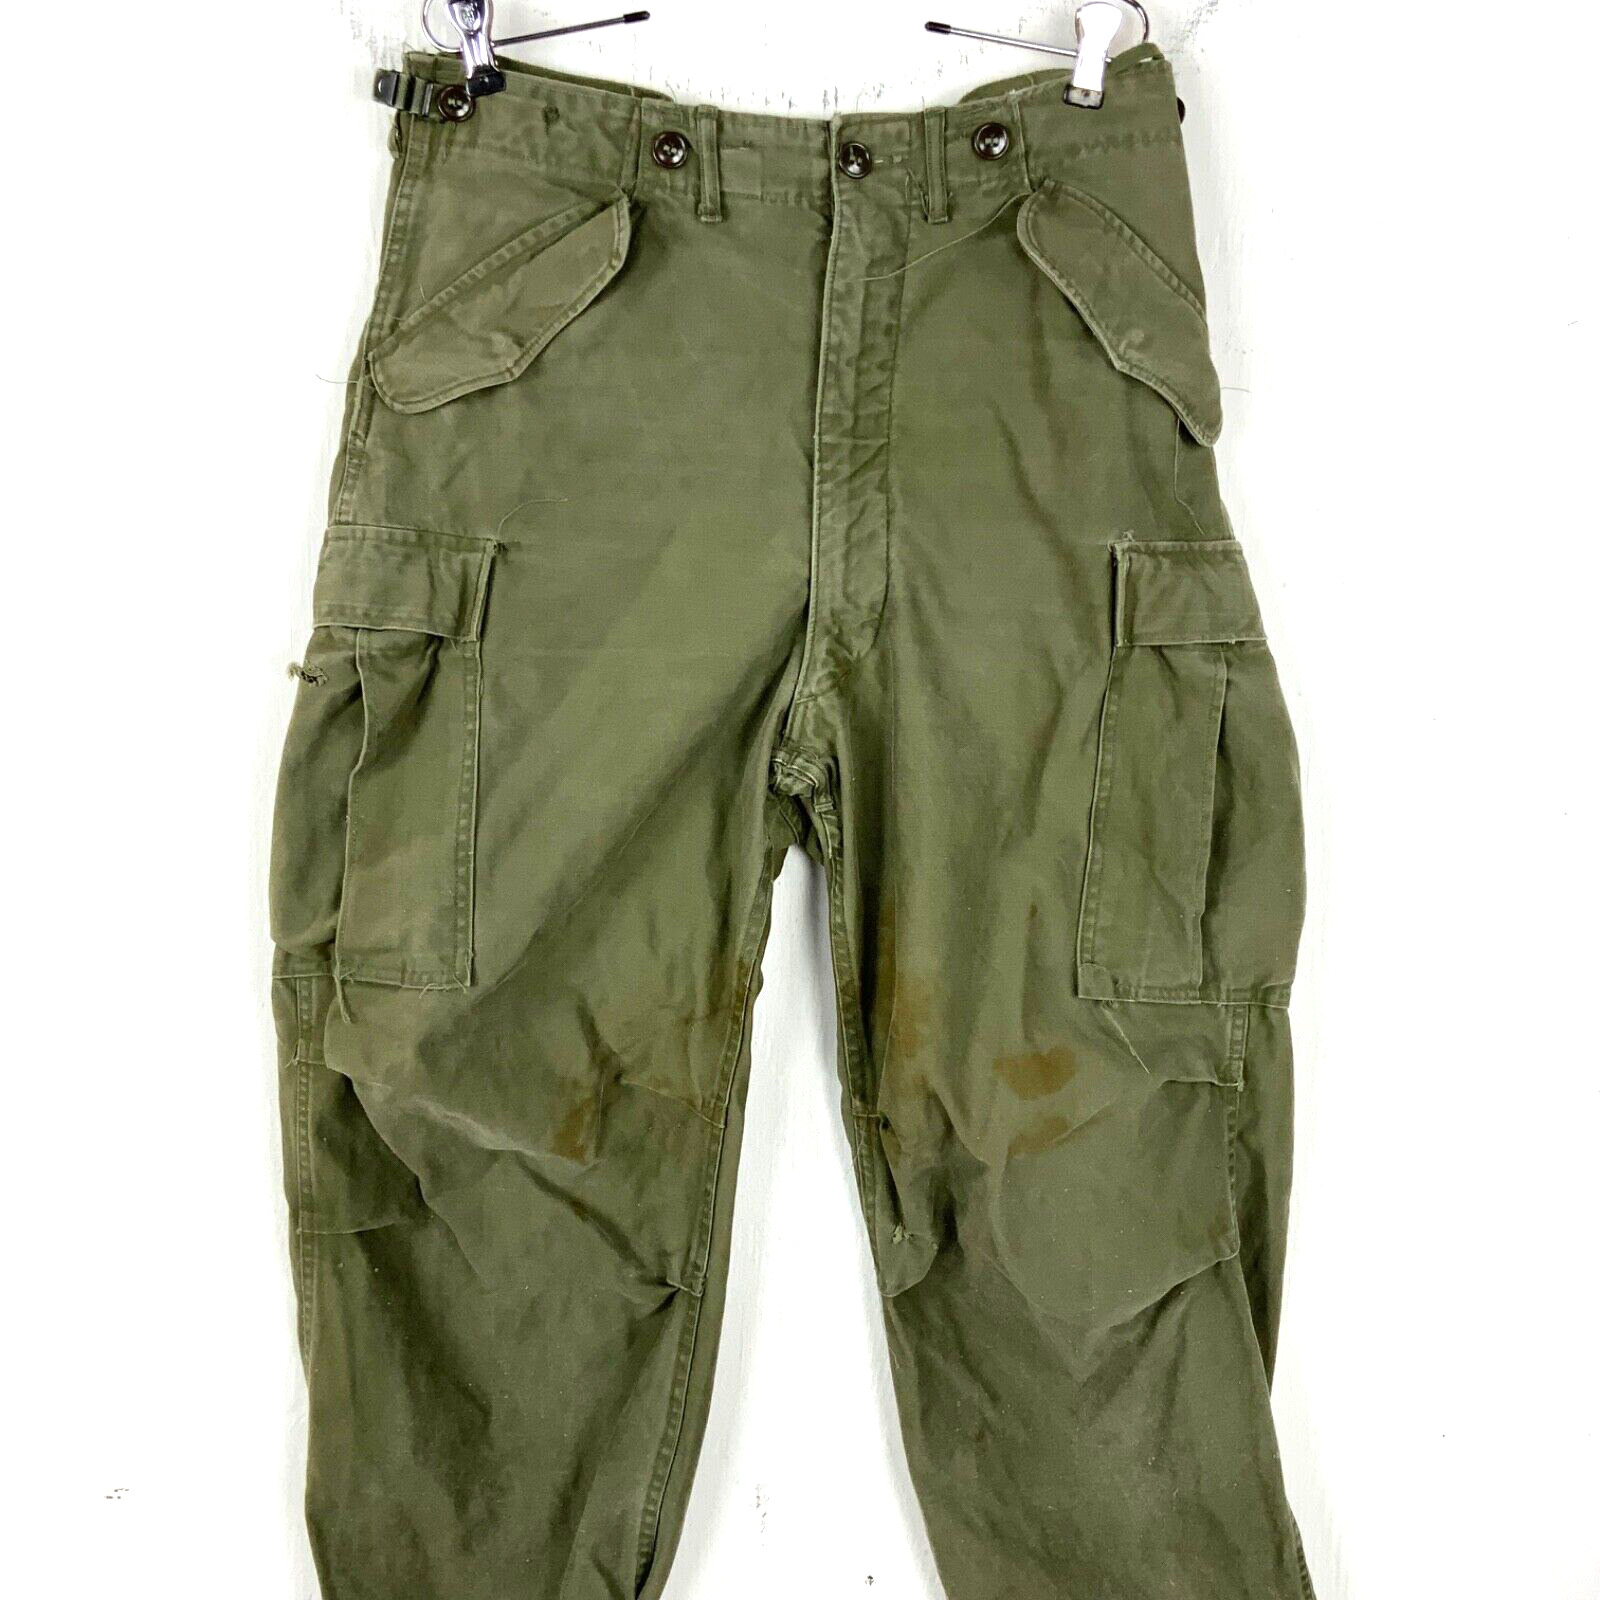 Vintage Military M-1951 Field Trousers Size Small Green Vietnam Era 50s